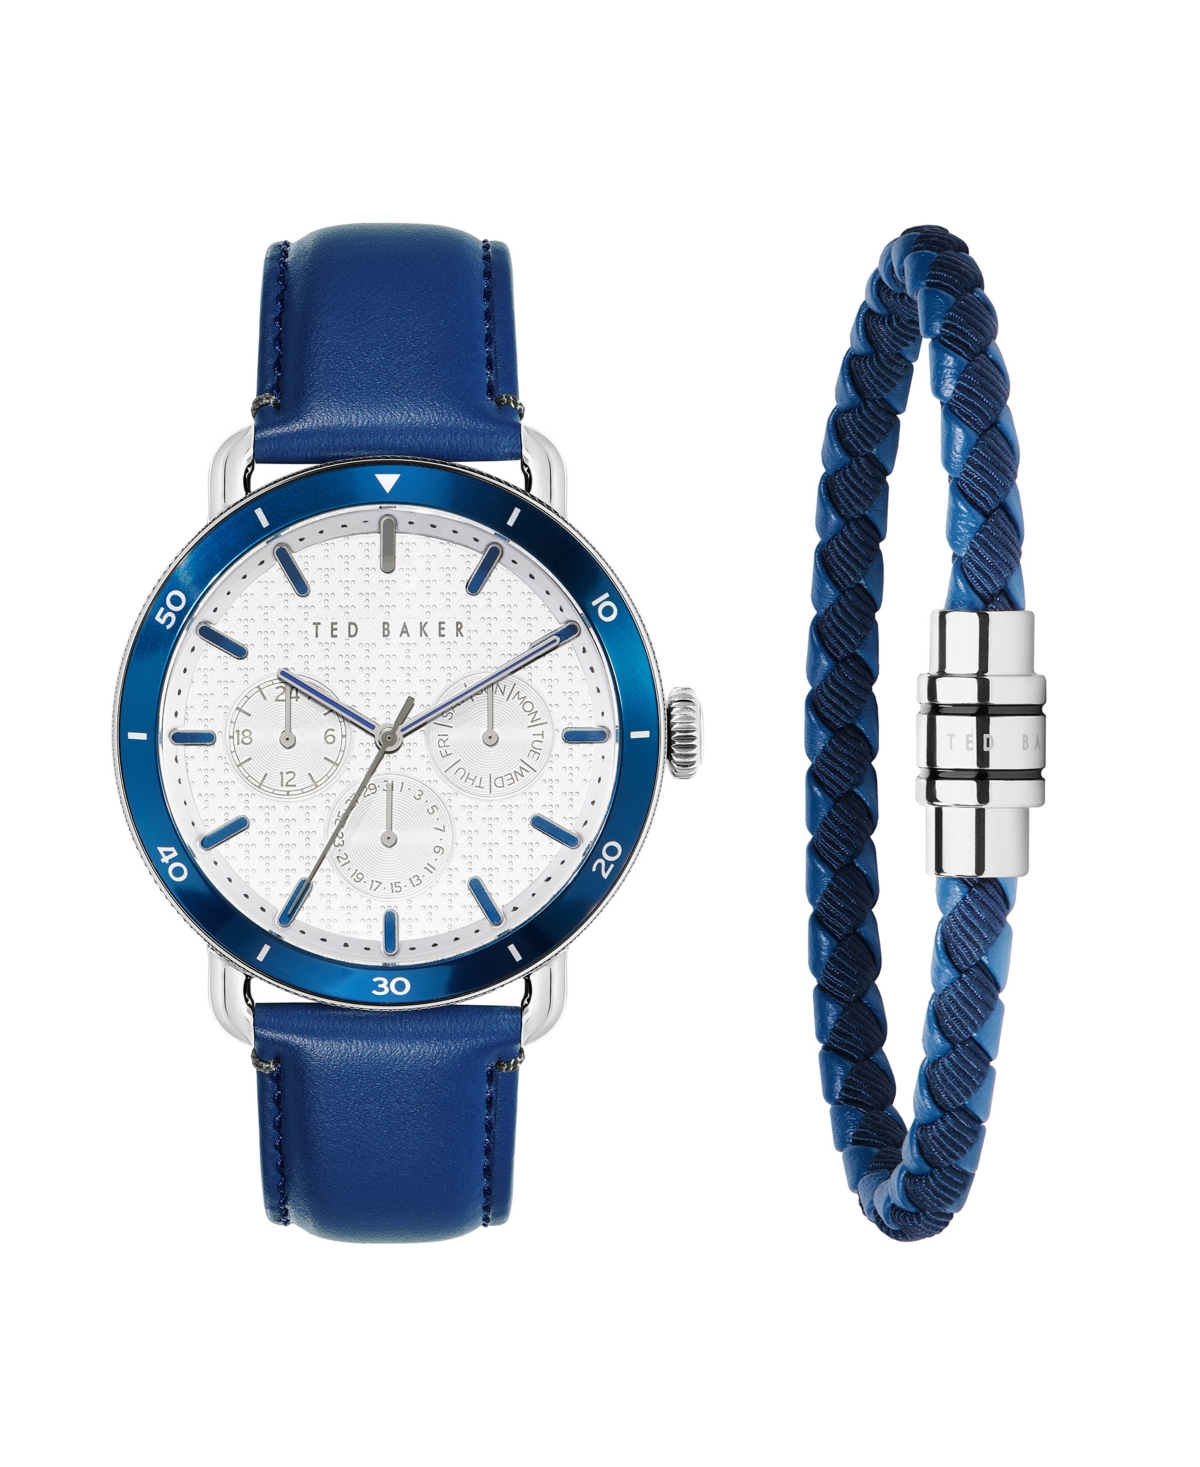 Men's Magarit Blue Leather Strap Watch 46mm and Bracelet Gift Set, 2 Pieces - Blue